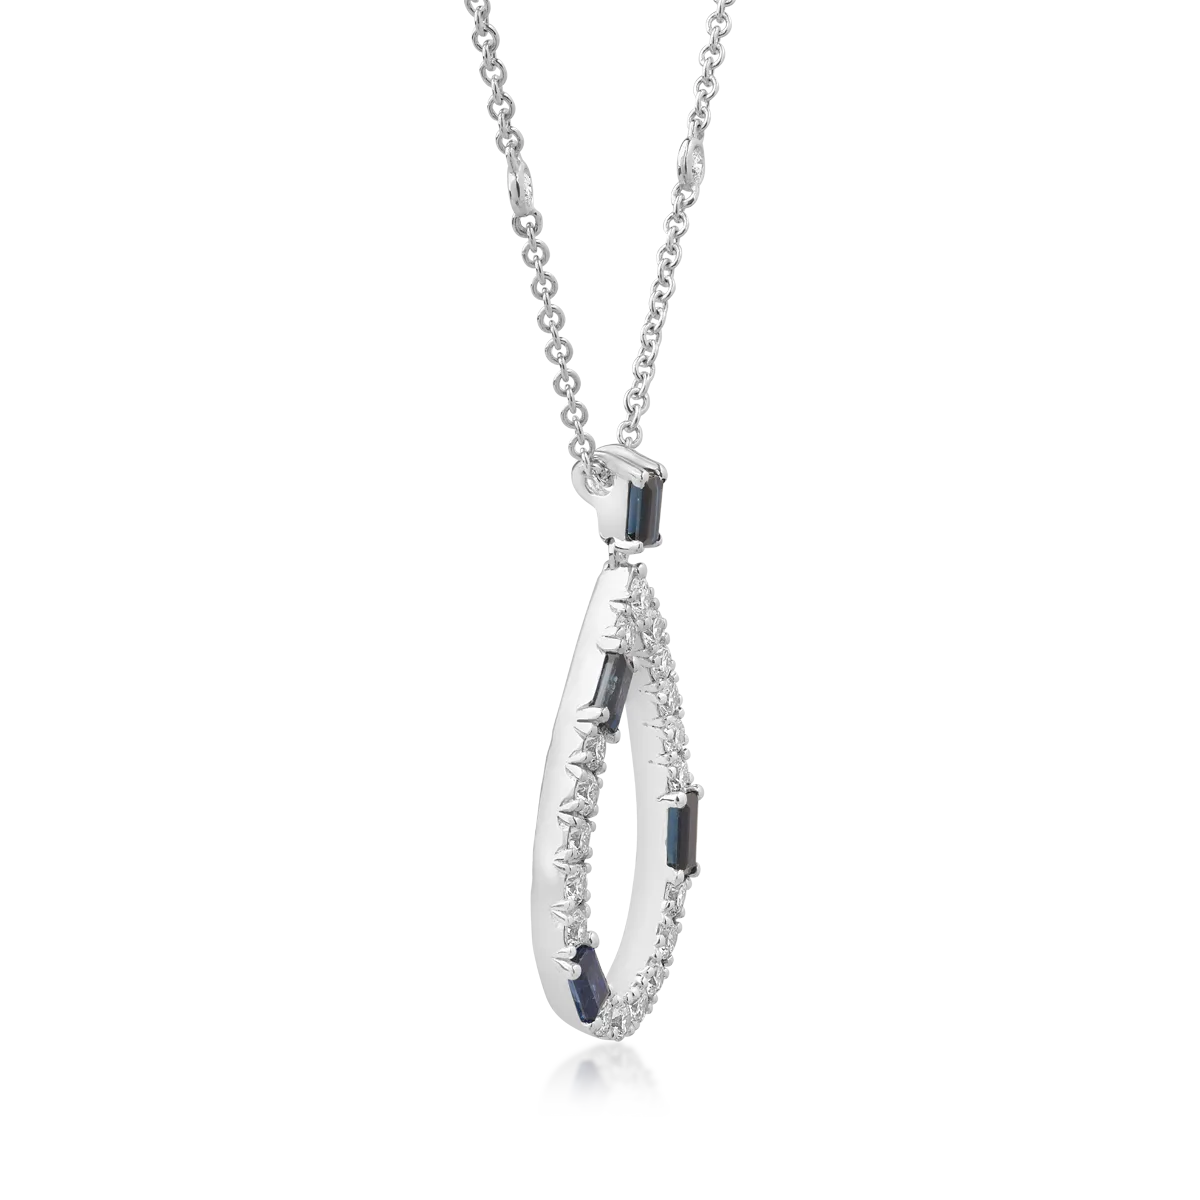 18K white gold pendant necklace with 0.8ct sapphires and 0.96ct diamonds